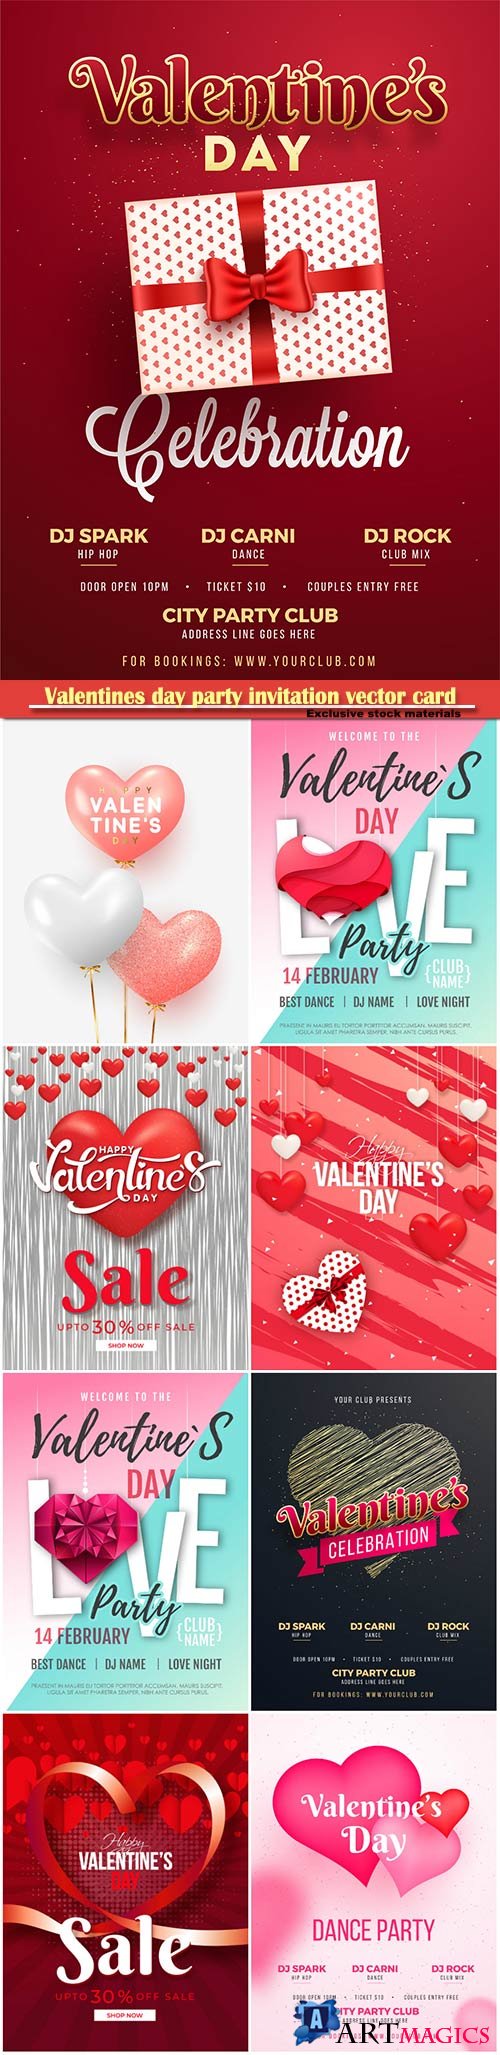 Valentines day party invitation vector card # 46